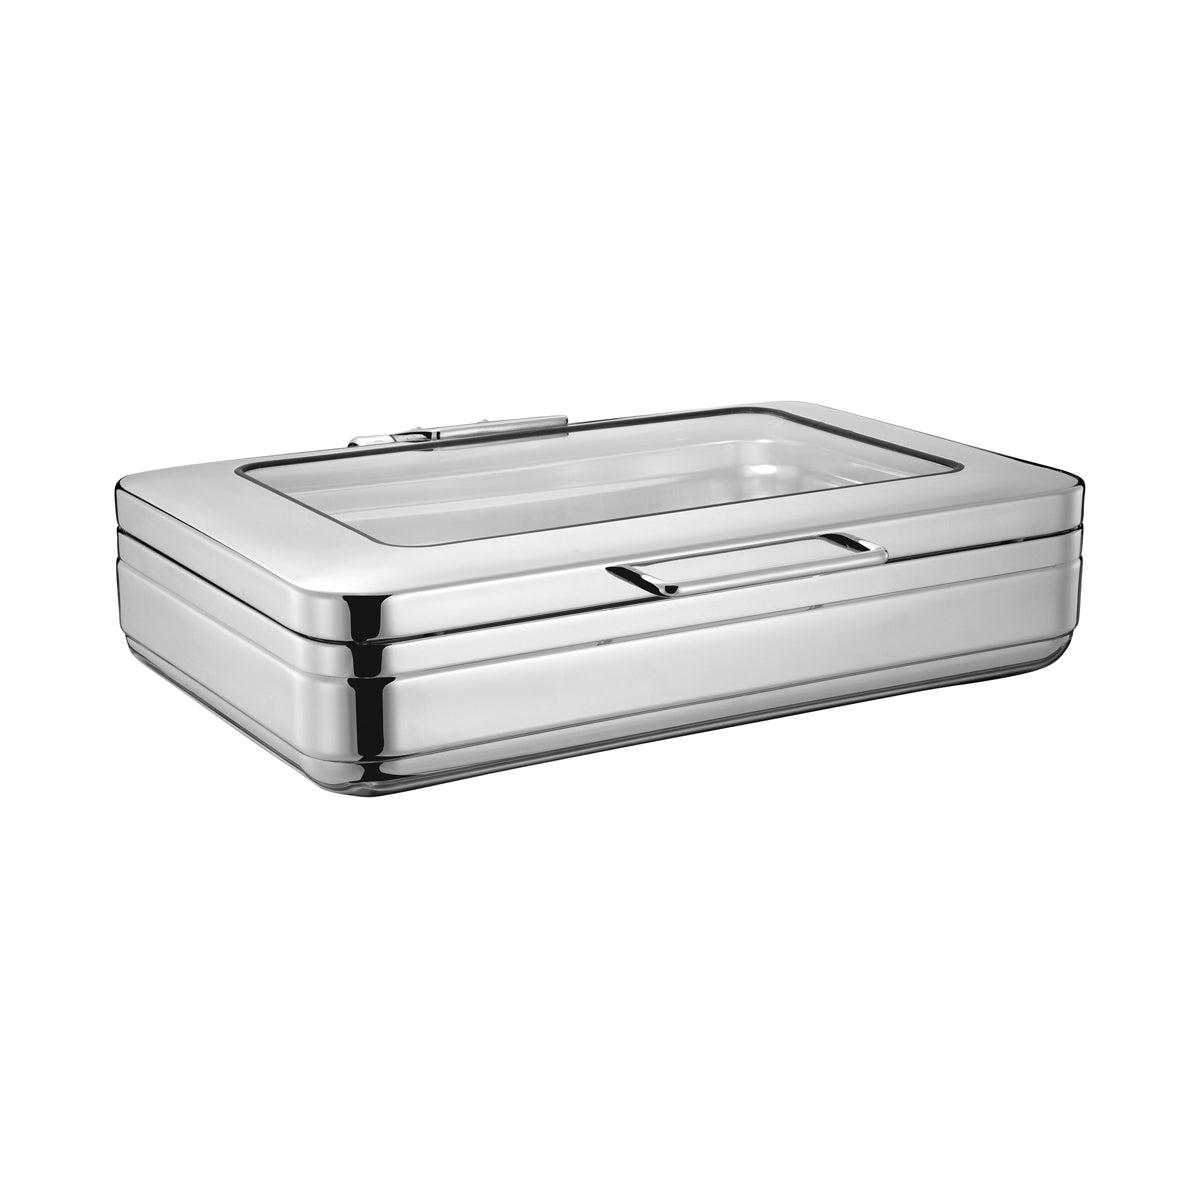 54901 Chef Inox Induction Chafer 18/8 Stainless Steel 1/1 Size with Glass Lid Tomkin Australia Hospitality Supplies